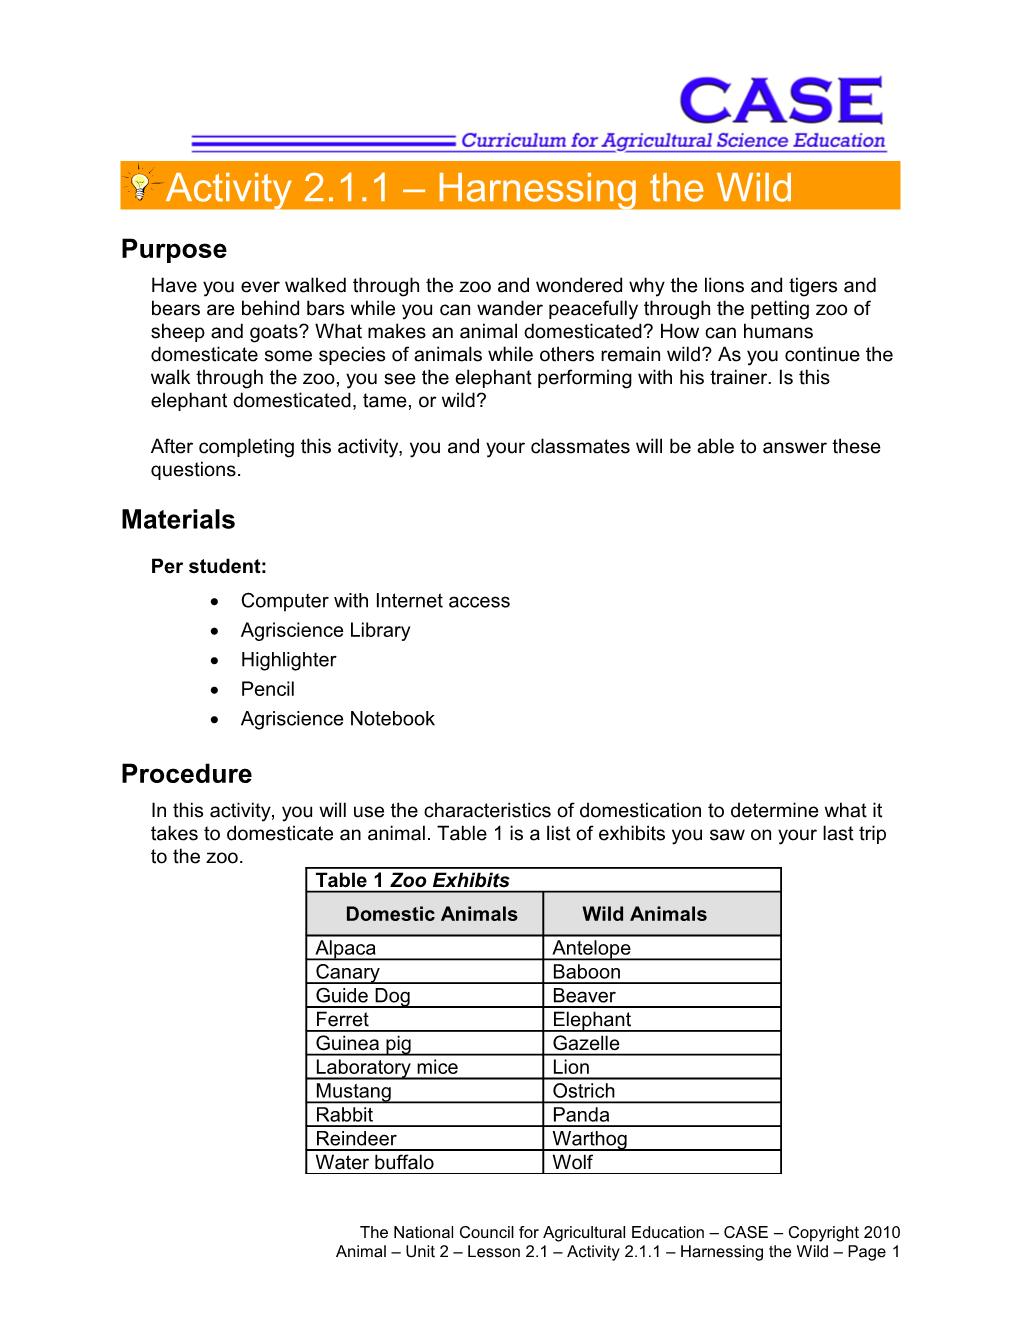 Activity 2.1.1 Harnessing the Wild